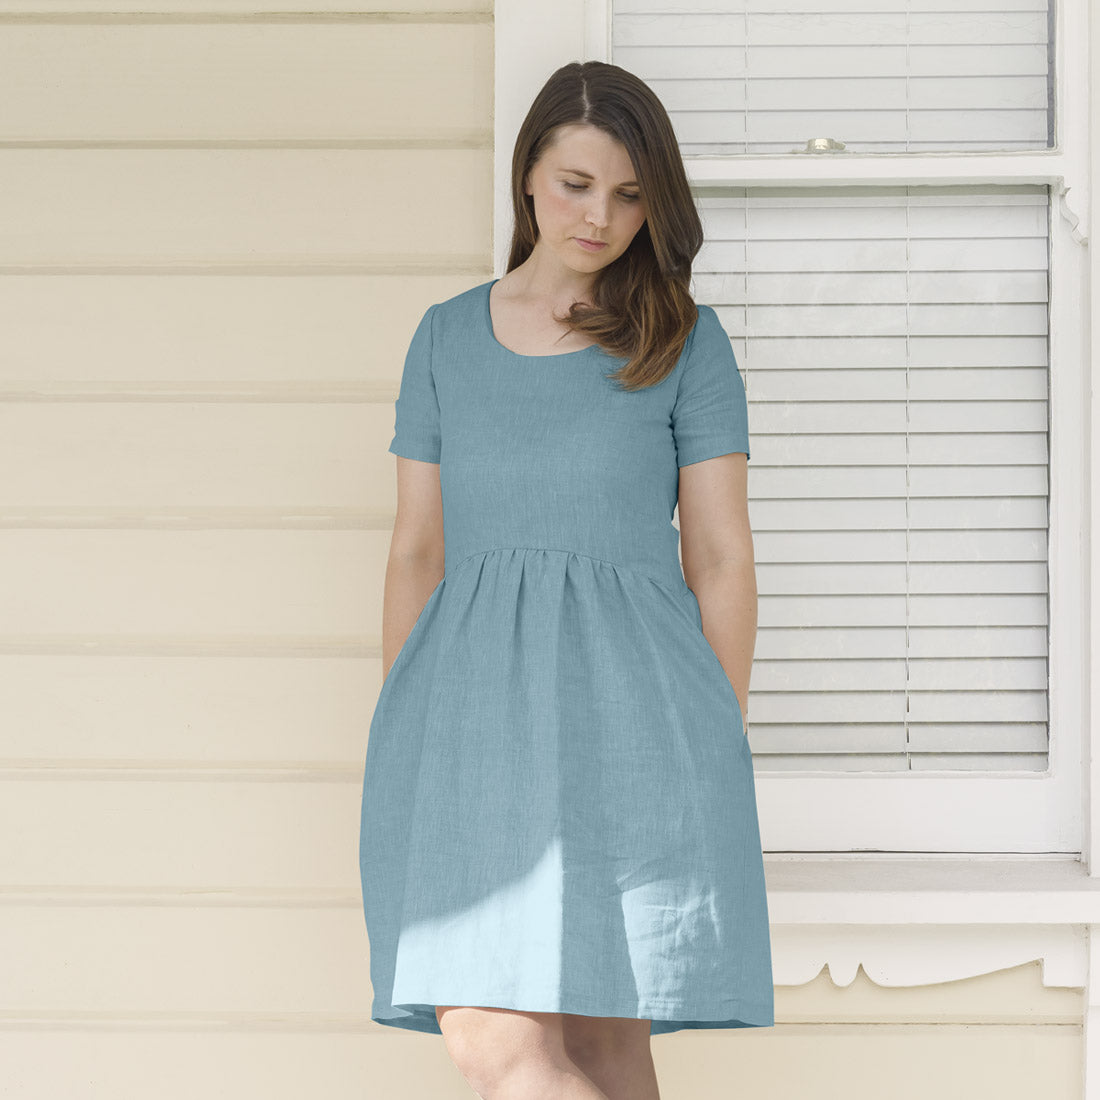 Women's linen dress, The Tess, by Twee and Co